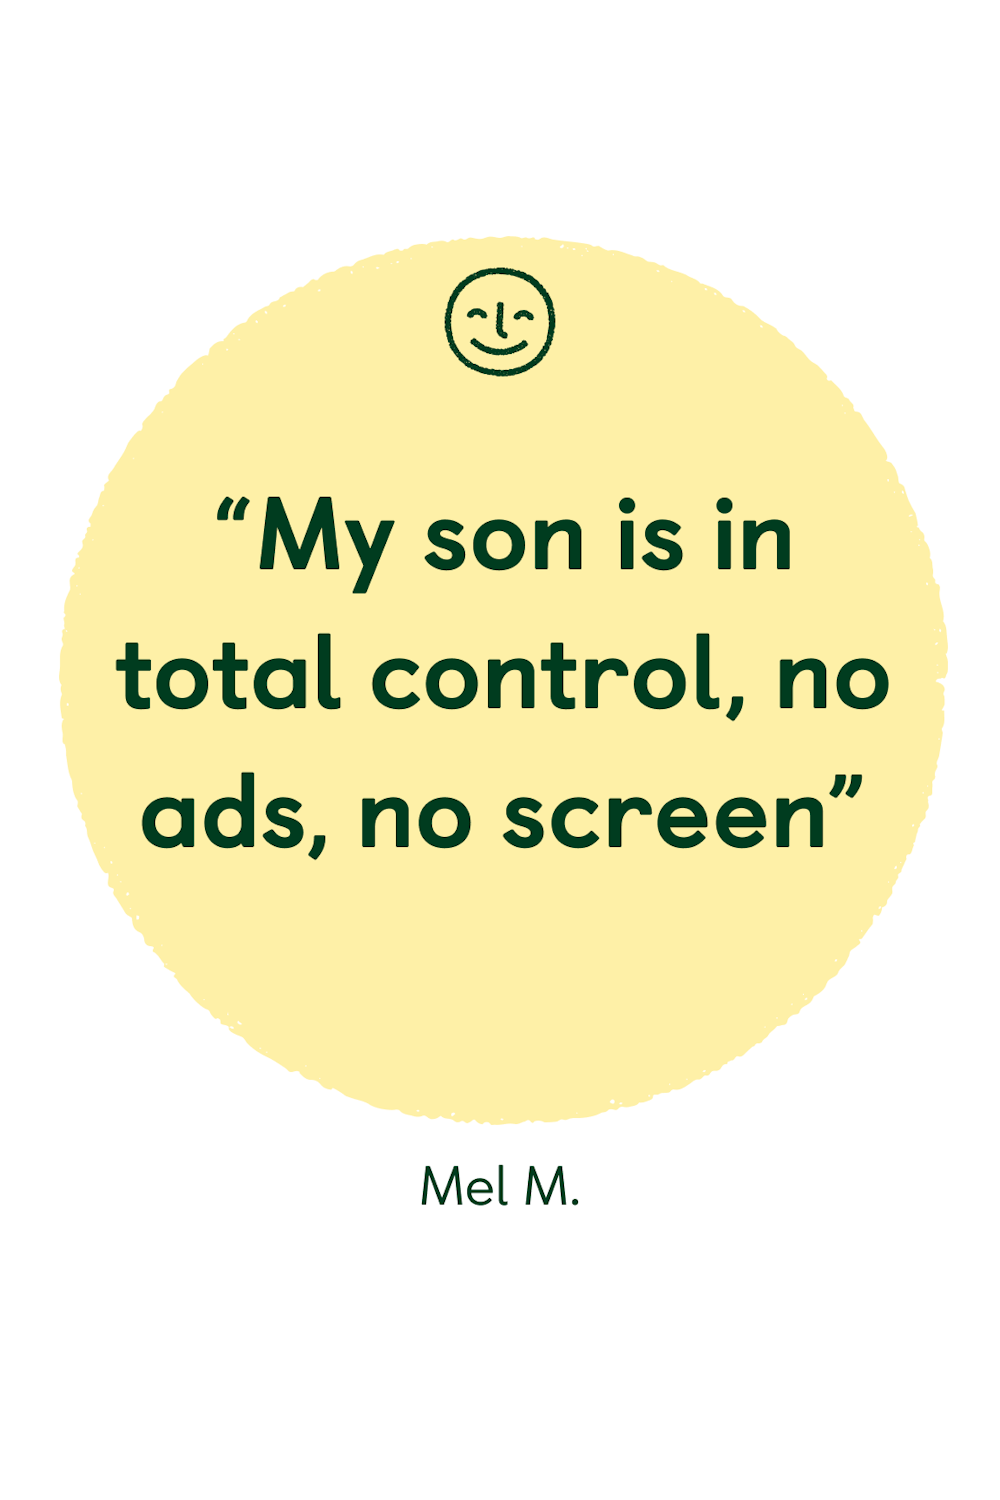 “My son is in total control, no ads, no screen”